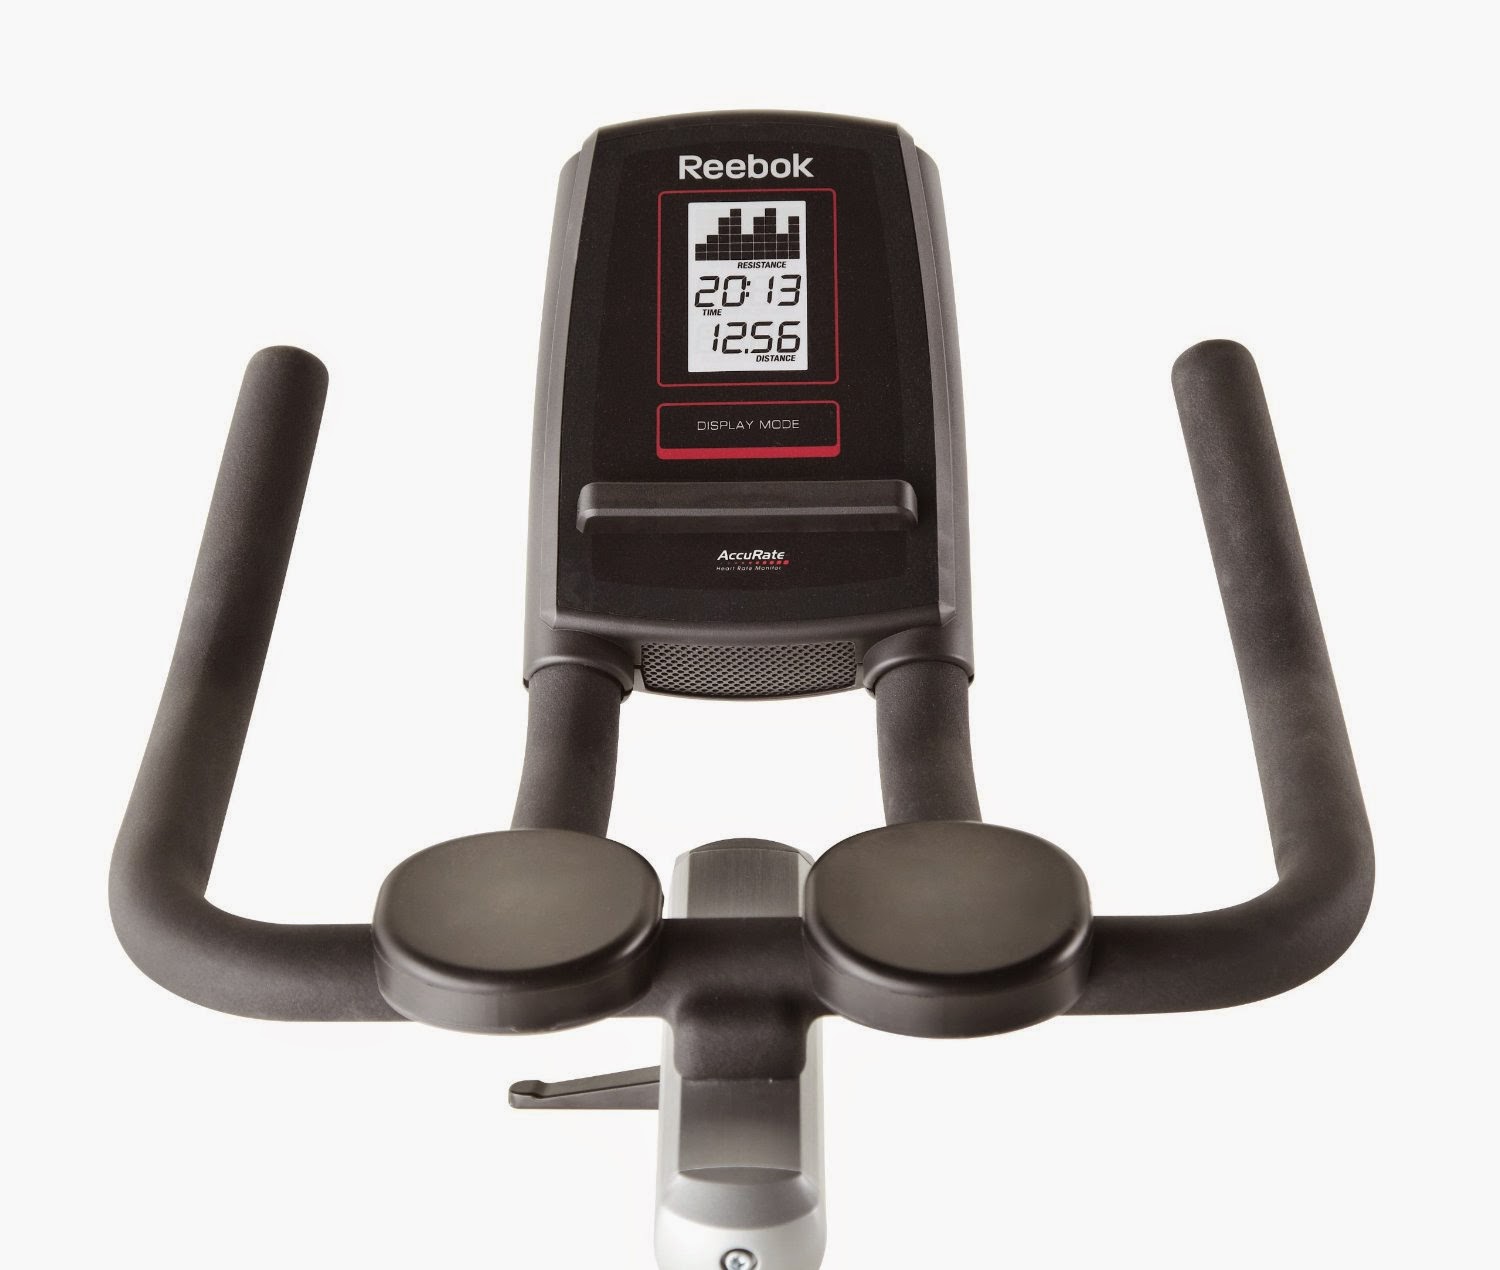 Reebok 510 Indoor Cycle, LCD console display tracks your workout stats